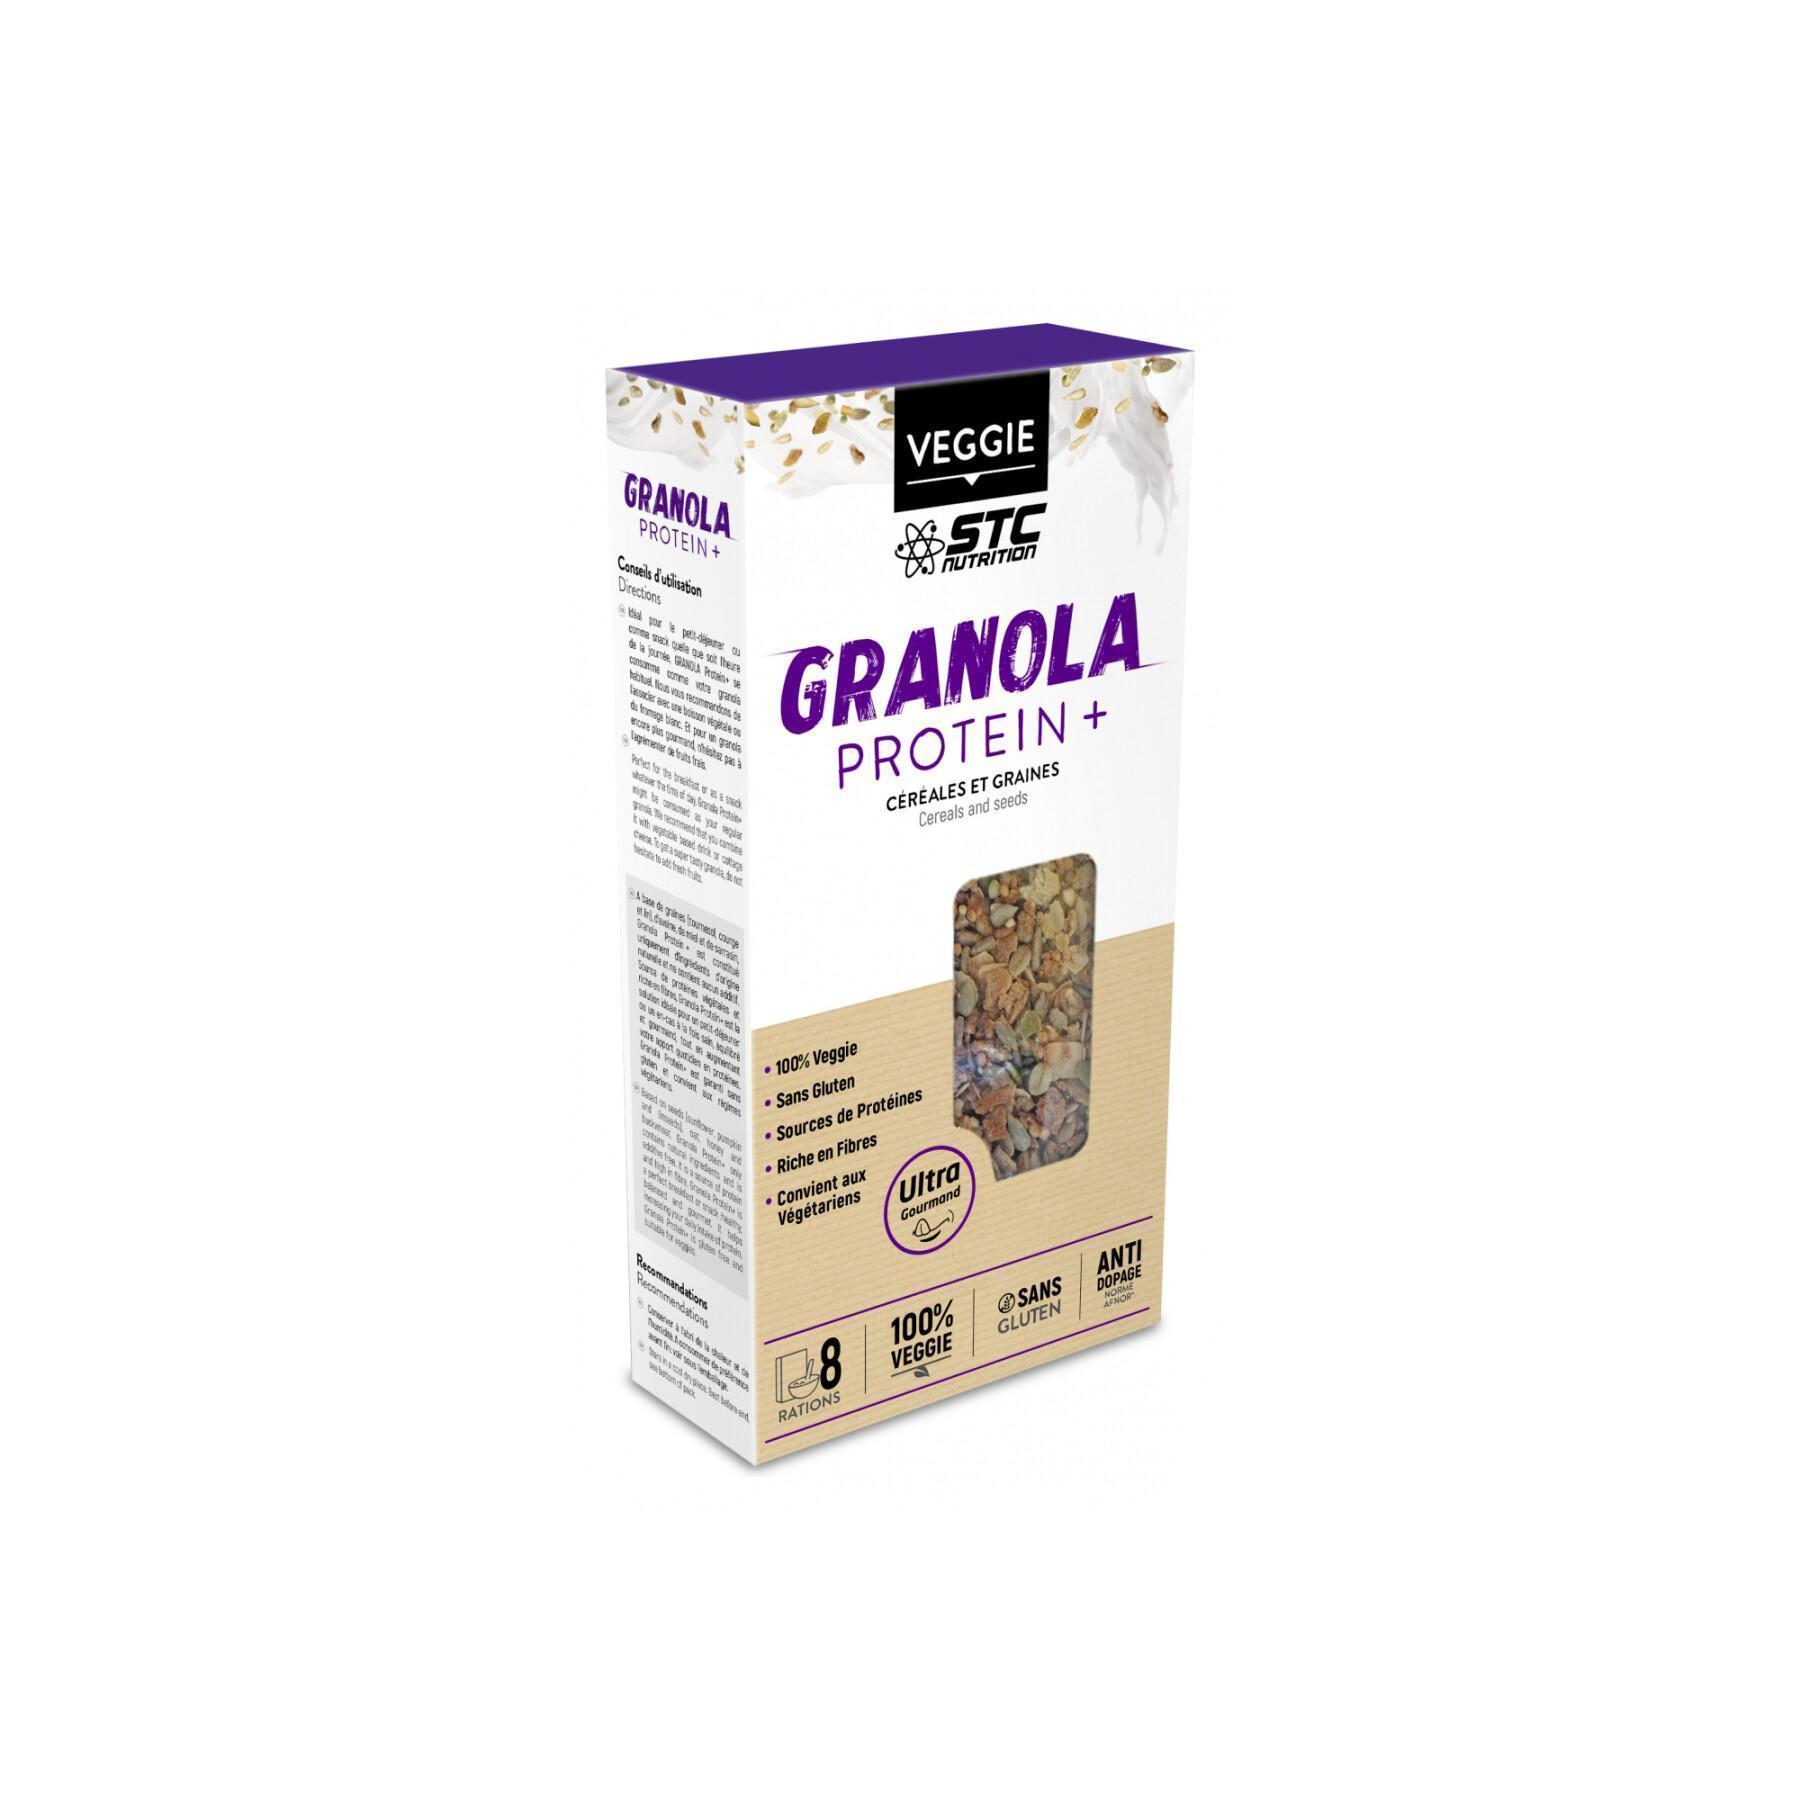 Protein+ Granola STC Nutrition céreales & graines - 452g